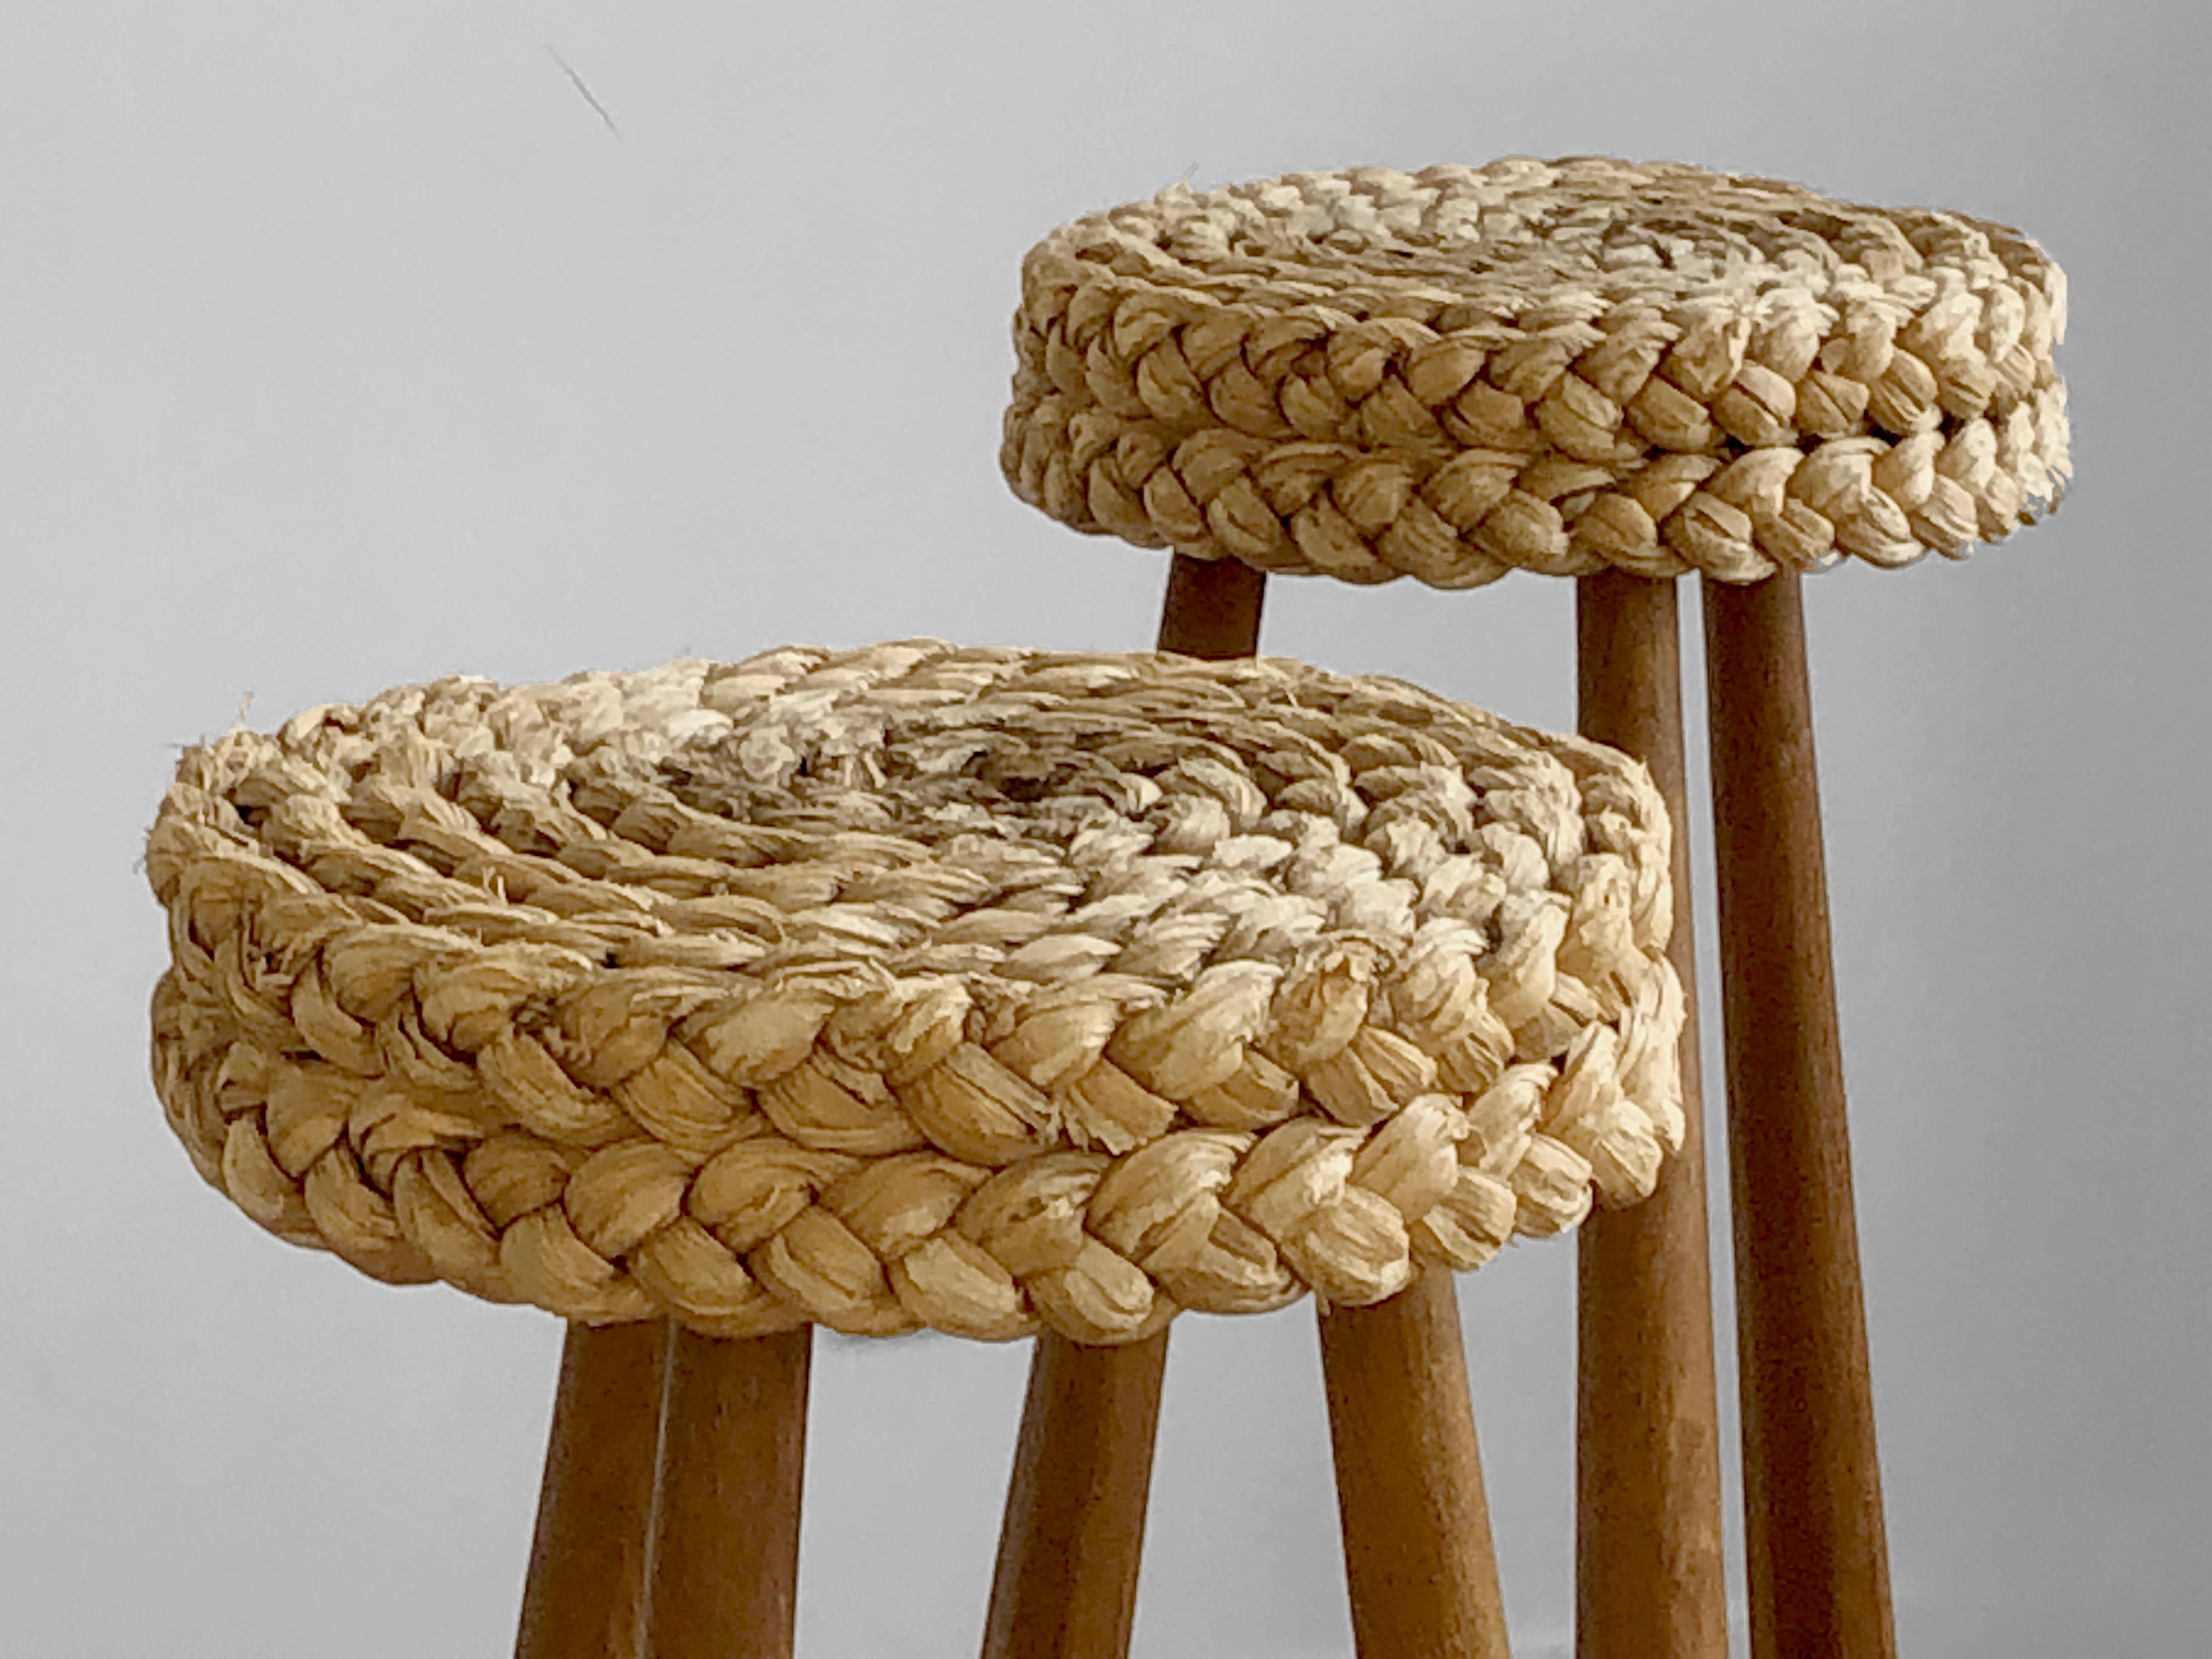 A beautiful and sculptural pair of tripod high stools or bat stools, massive handmade elm structures, sensual lines, circular thick rope seating areas, Modernist, Forme Libre, Brutalist, Folk Art, by Adrien Audoux & Frida Minnet, France, 1950.